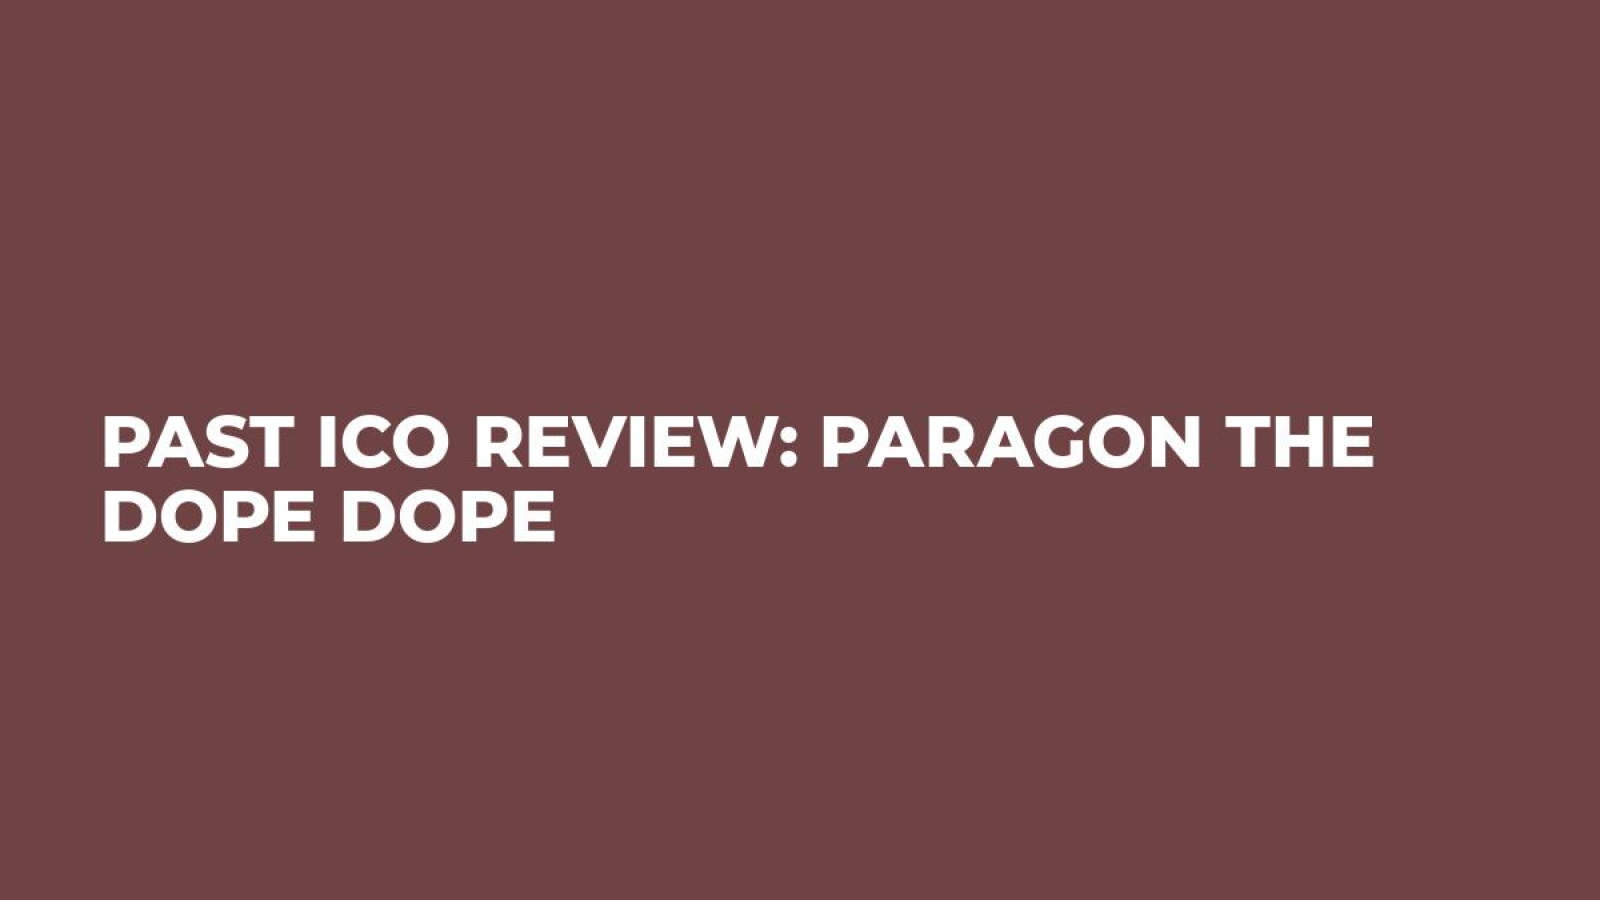 Past ICO Review: Paragon the Dope Dope